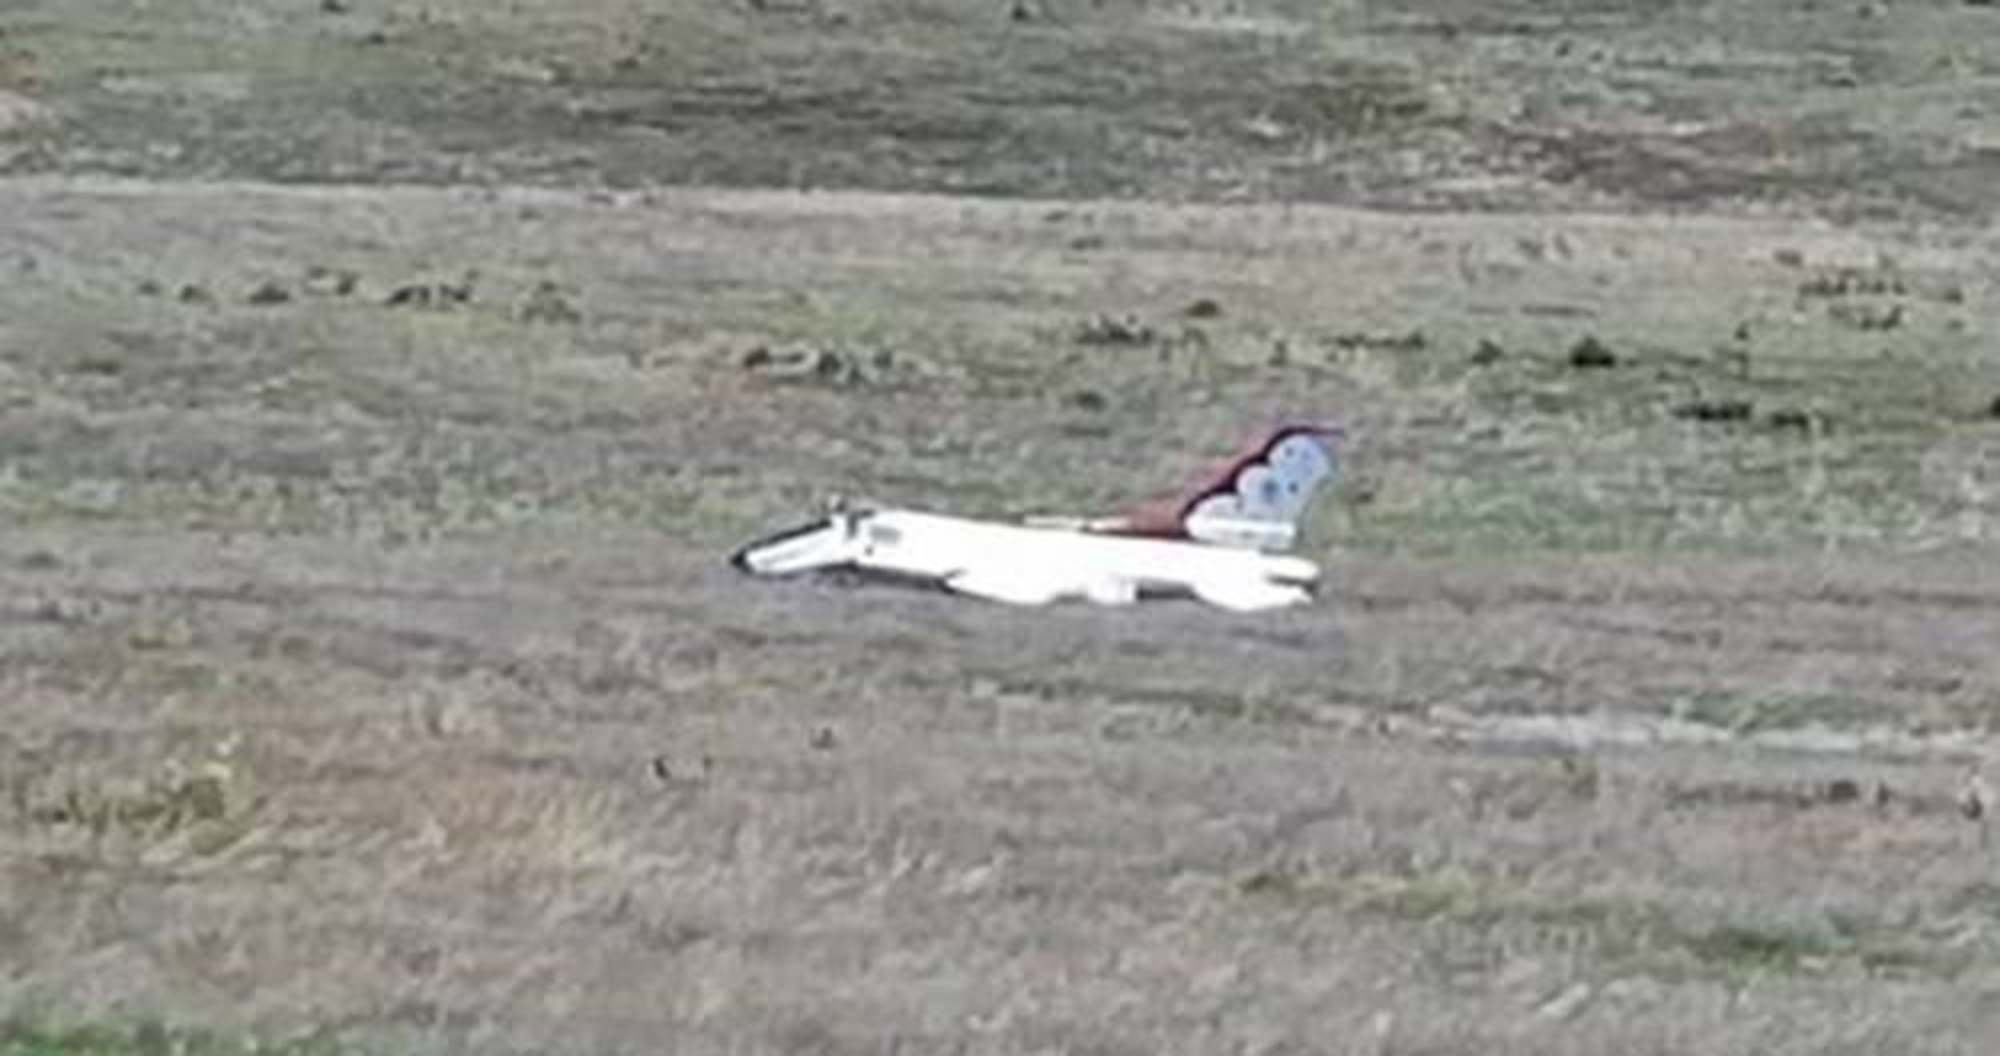 A U.S Air Force Thunderbirds F-16 Fighting Falcon jet crash landed June 2 in a field near Colorado Springs, Colorado, following the U.S. Air Force Academy commencement. (Courtesy photo)